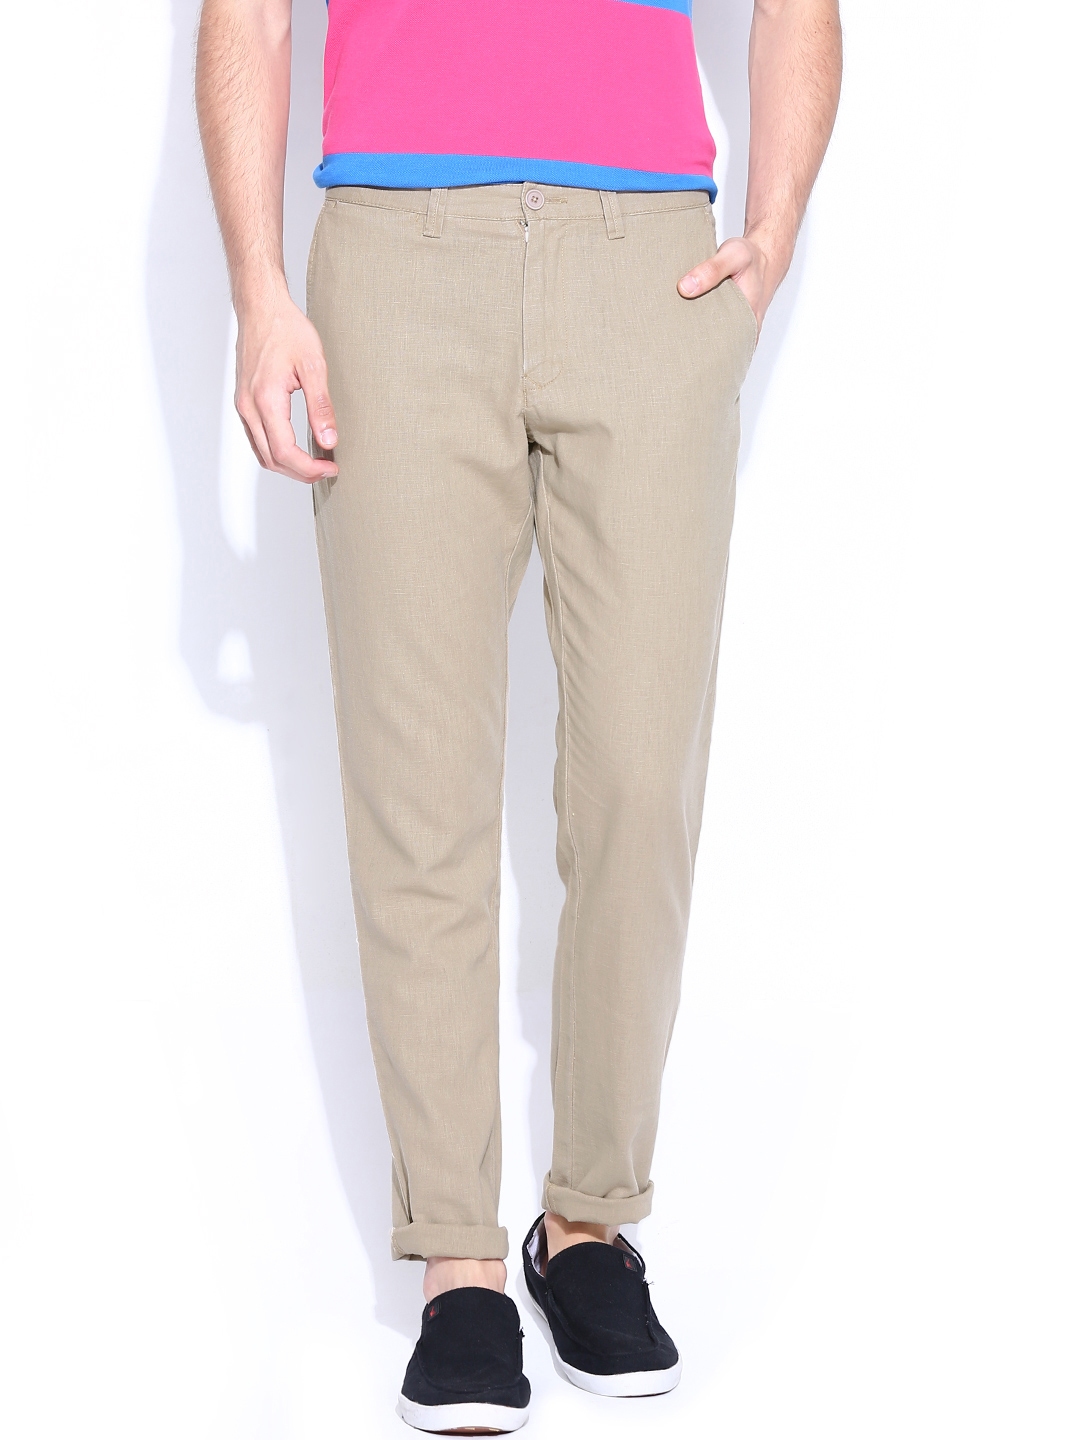 United Colors of Benetton Trousers in pure linen Military Green  Womens  Trousers  Chinos  Midivacance